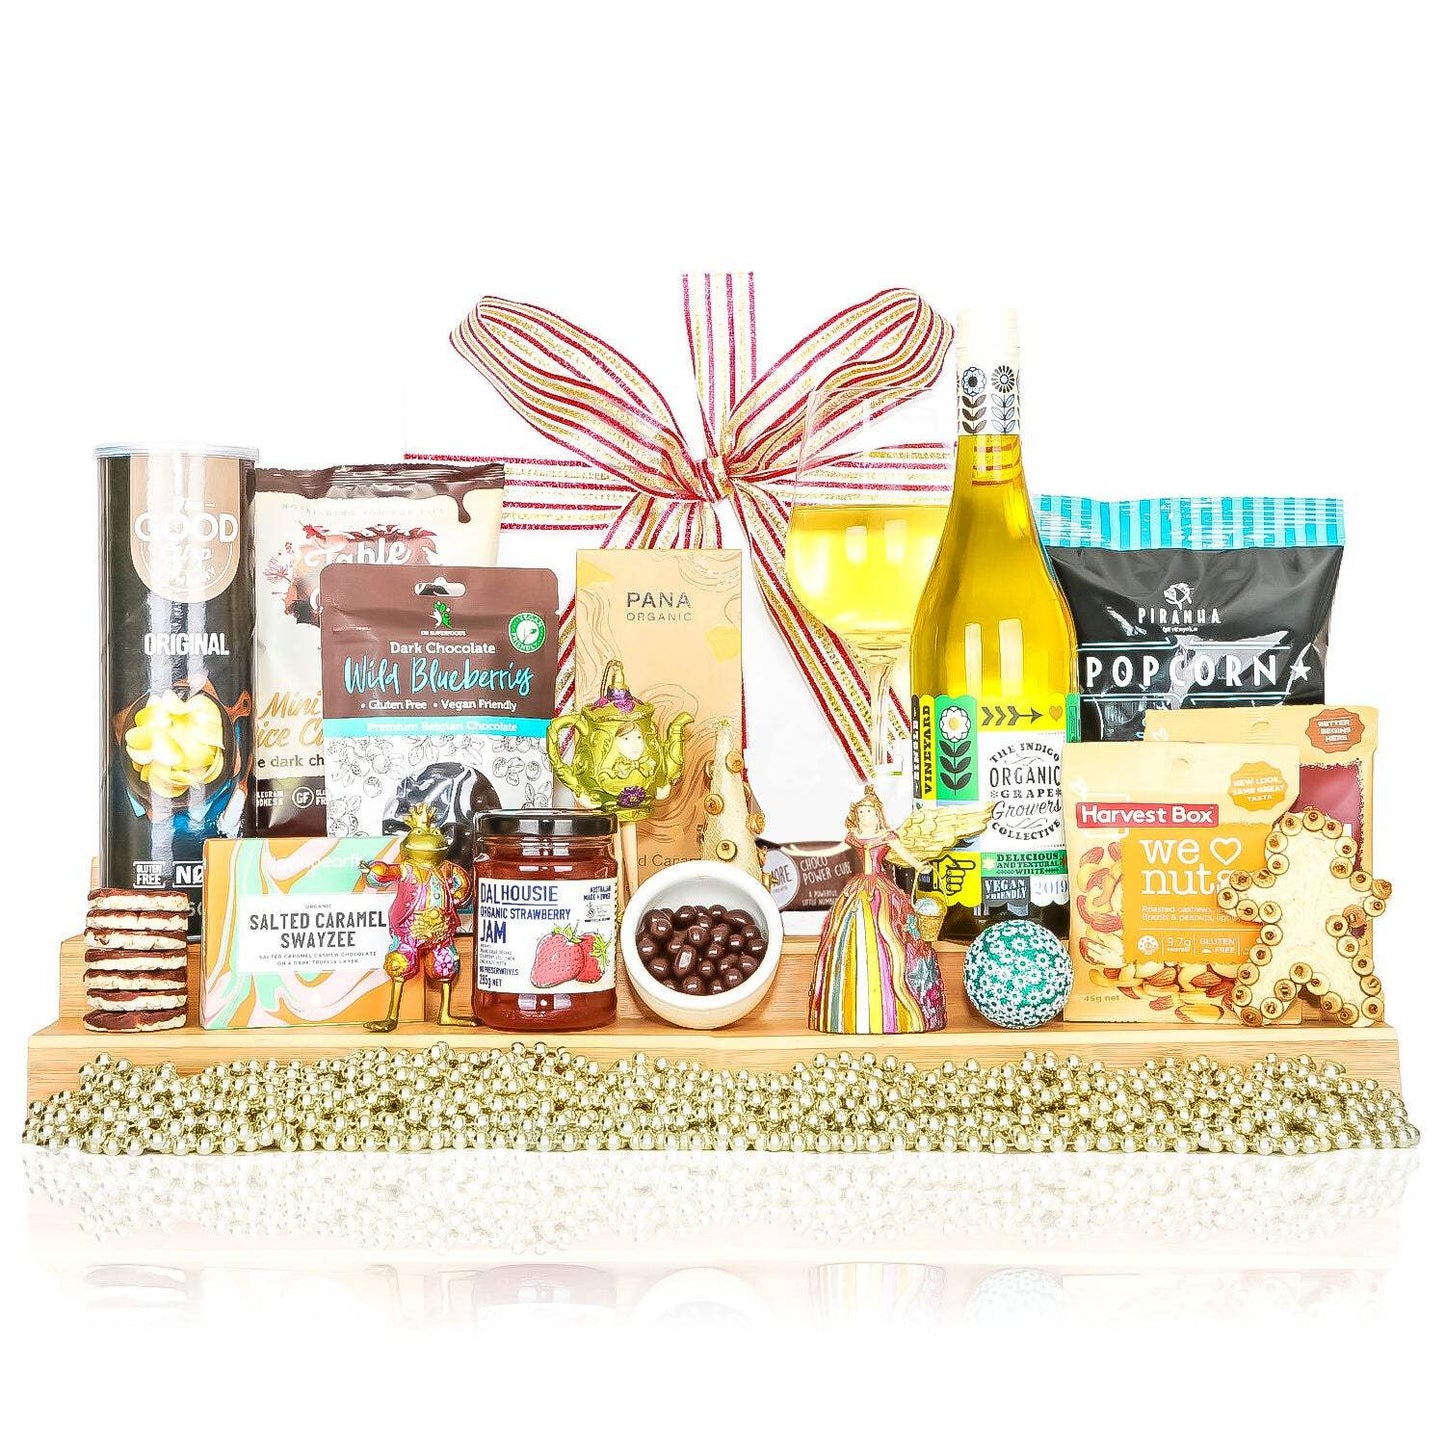 Christmas Cheer - Healthy Belly Hampers - pure indulgence - birthday hampers - gift hampers - gift hampers melbourne - gift hampers australia - organic hampers -vegan hampers - gluten free hampers - birthday hampers -anniversary hampers - wedding hampers - alcohol hampers